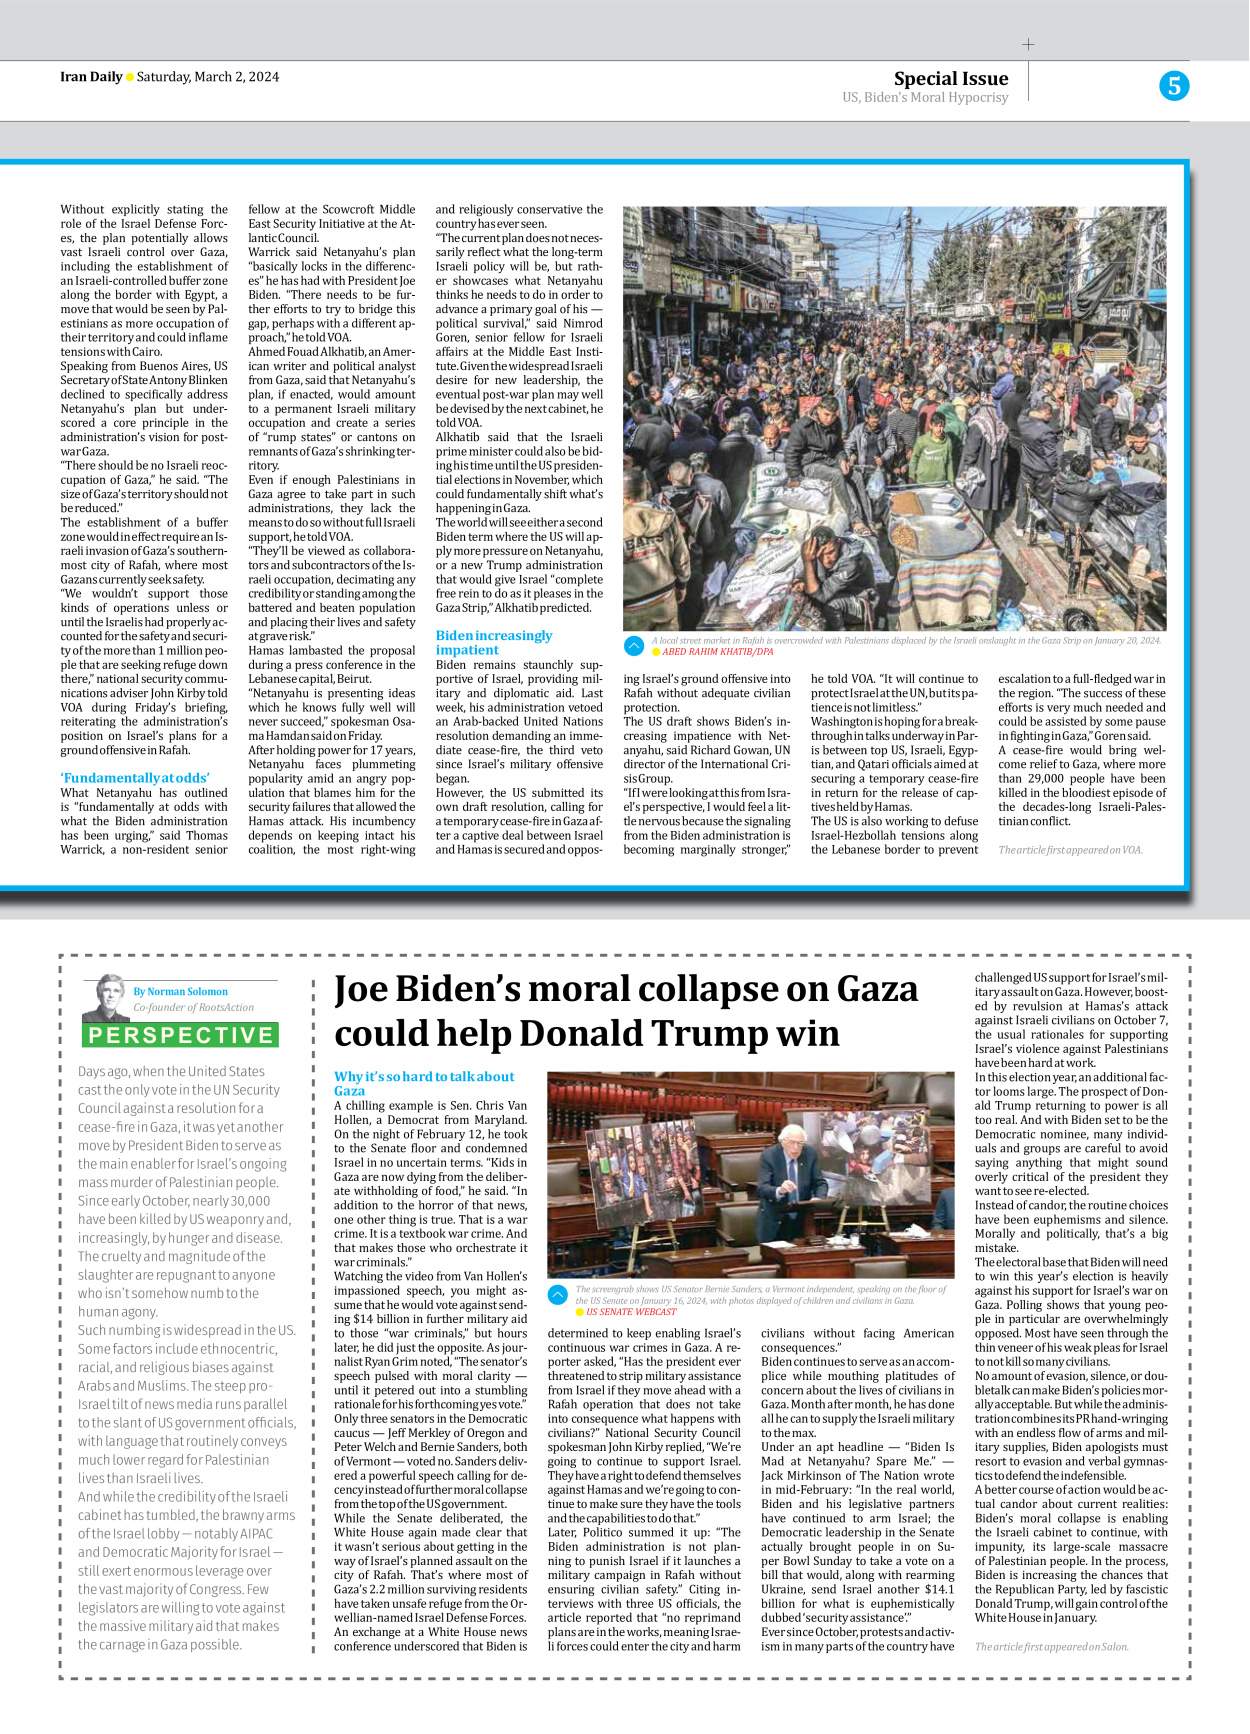 Iran Daily - Number Seven Thousand Five Hundred and Nineteen - 02 March 2024 - Page 5